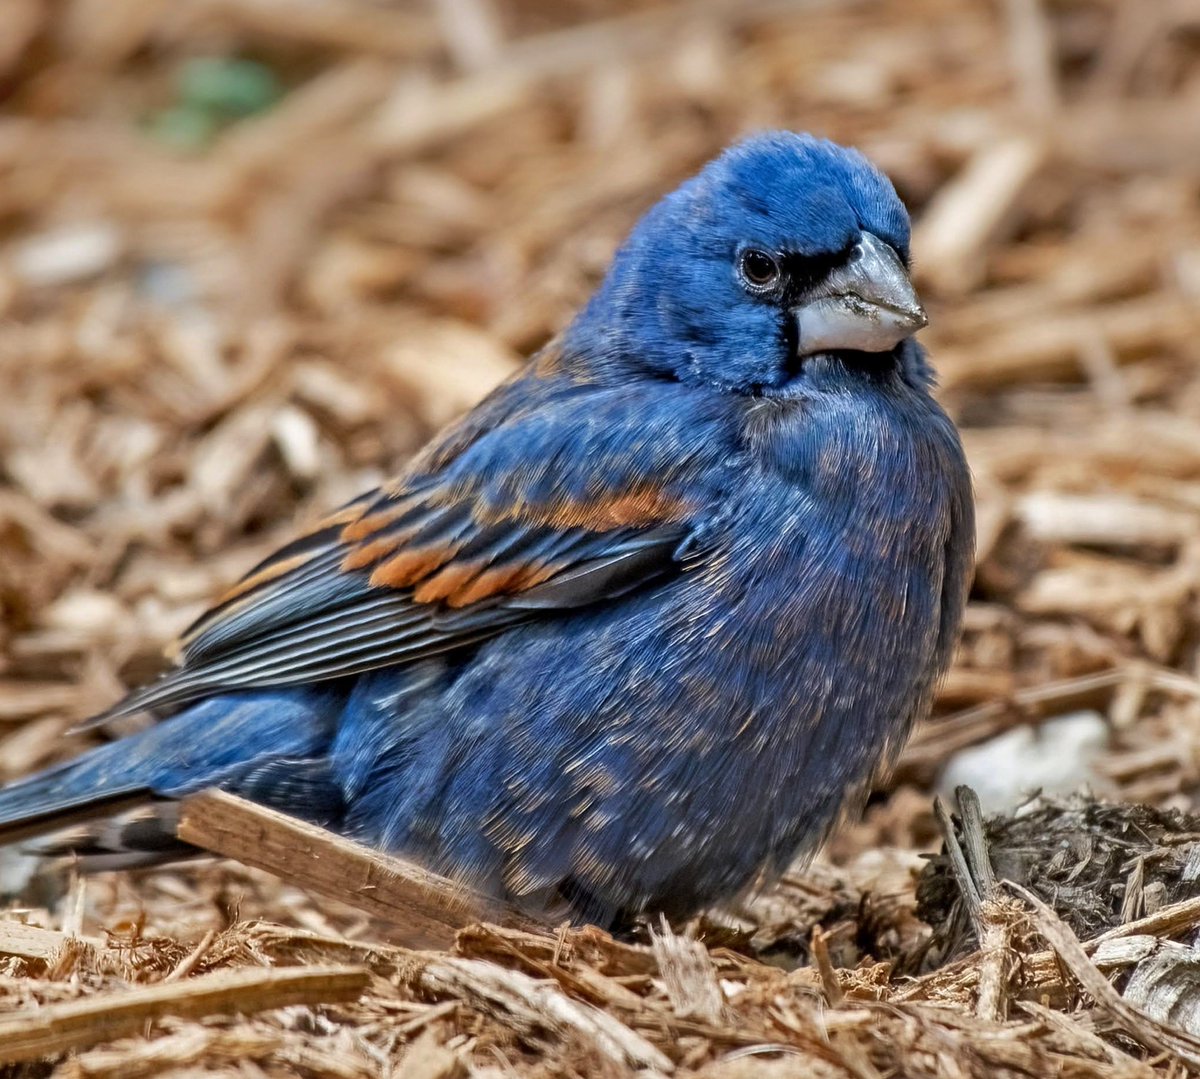 Today's Blue Grosbeak male, a rare and colorful visitor to a garden in the East Village. 💙